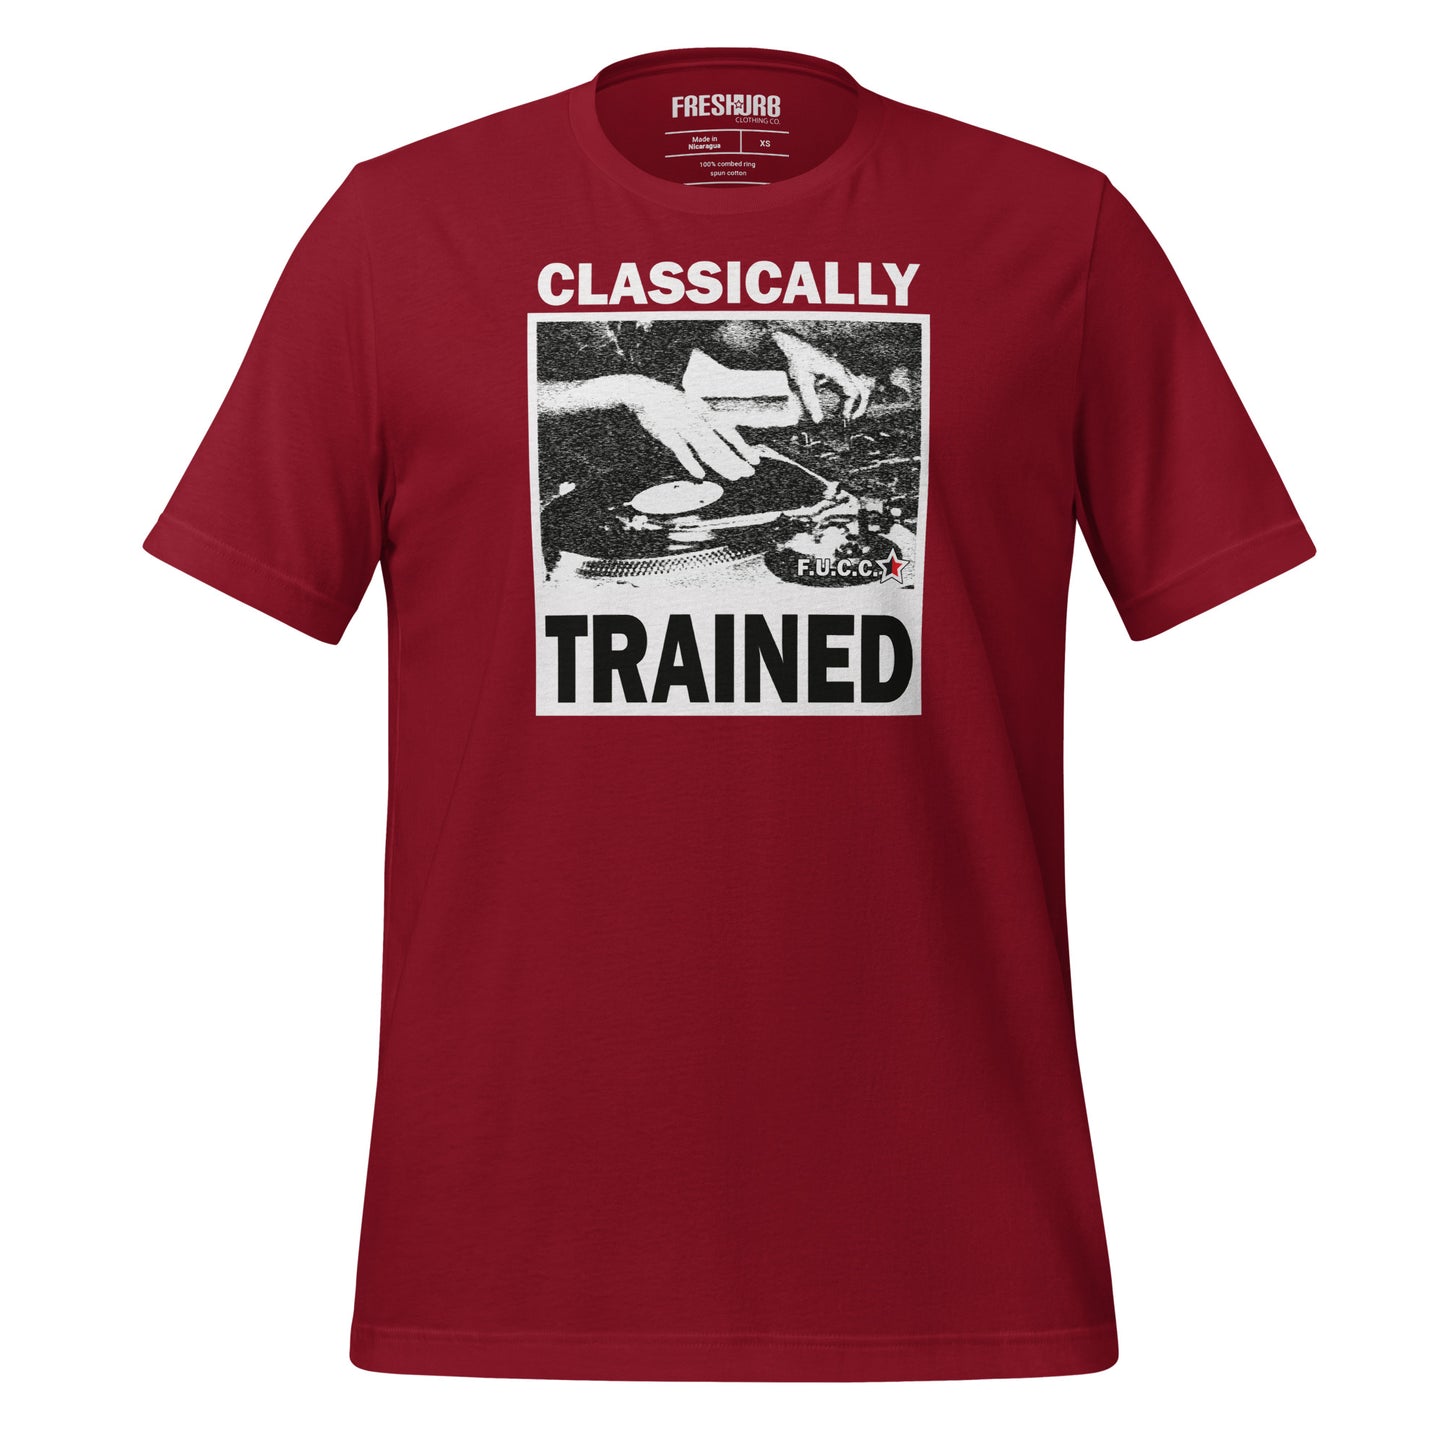 CLASSICALLY TRAINED | Modern Fitted Tee